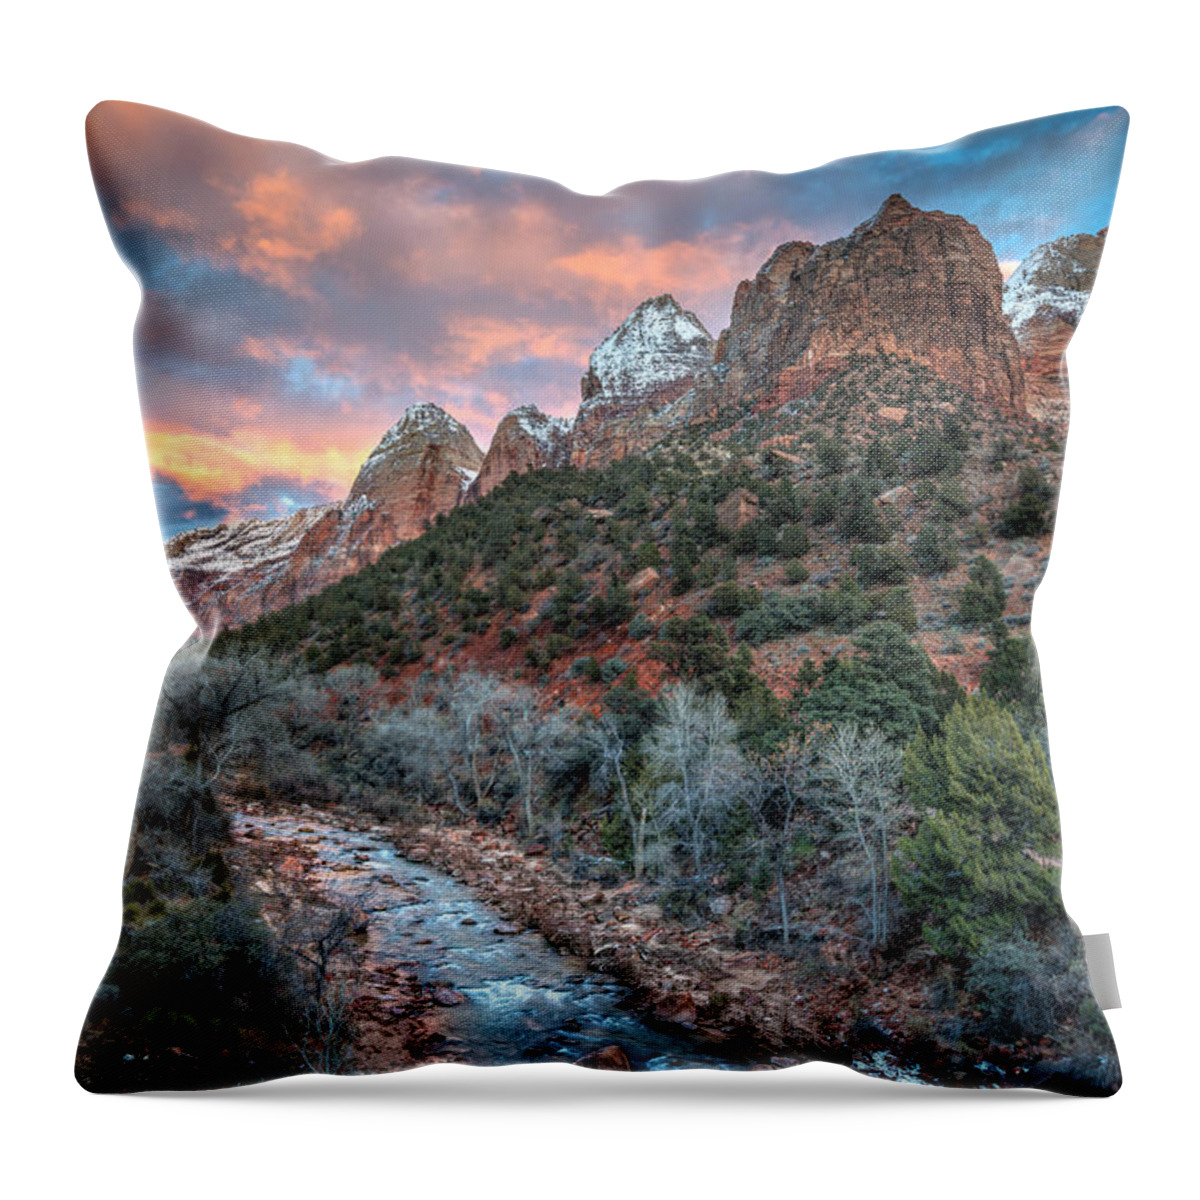 Zion National Park Throw Pillow featuring the photograph Wintery Sunset at Zion National Park by James Udall